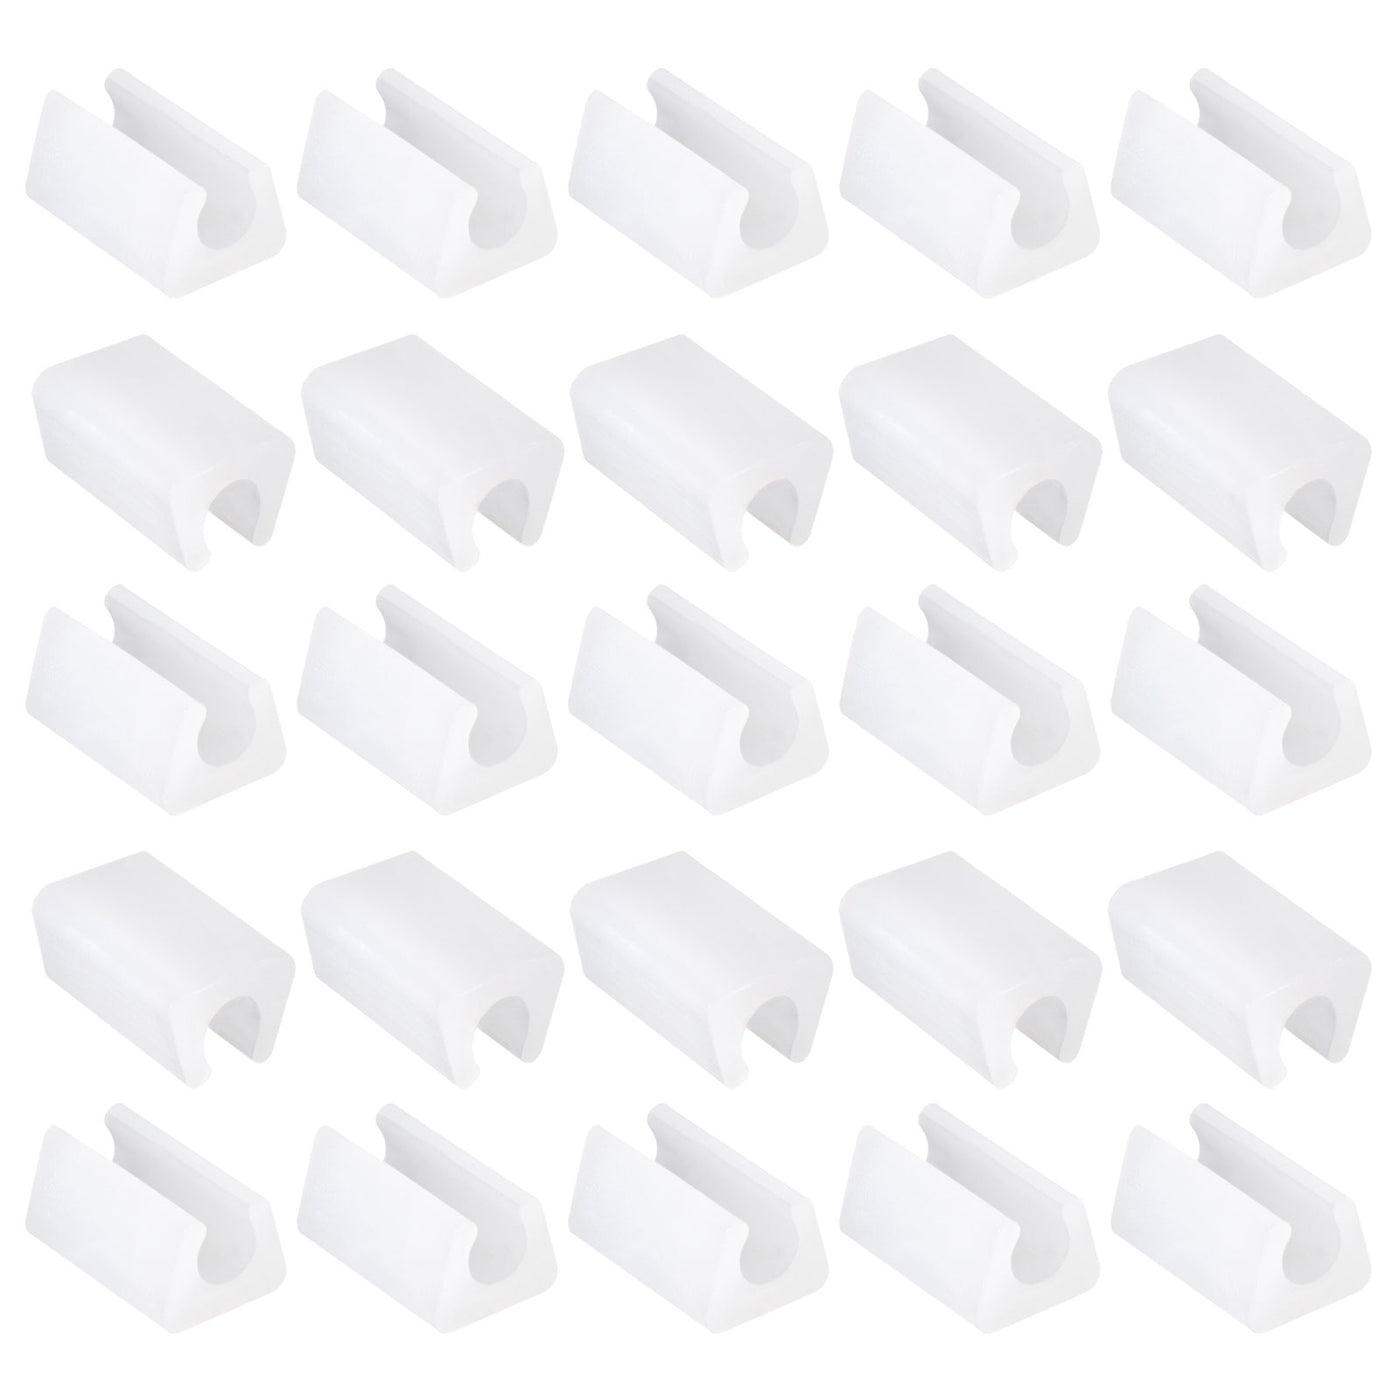 uxcell Uxcell 25Pcs Rectangle Shaped Non-Slip Chair Leg Tip 7-8mm Plastic Furniture Feet White